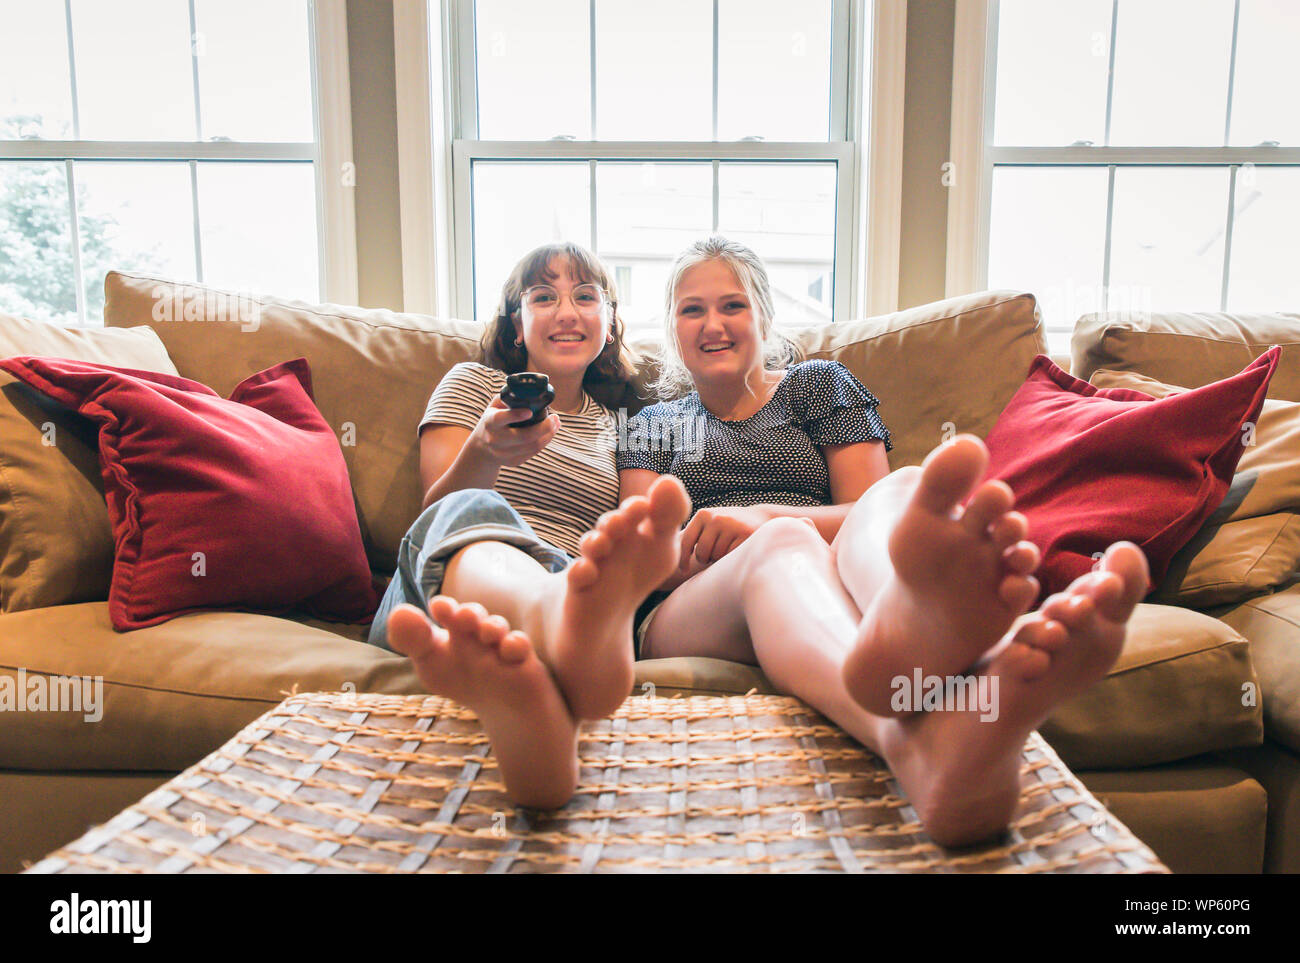 Two teenage girls sitting on couch with feet up watching television. Stock Photo